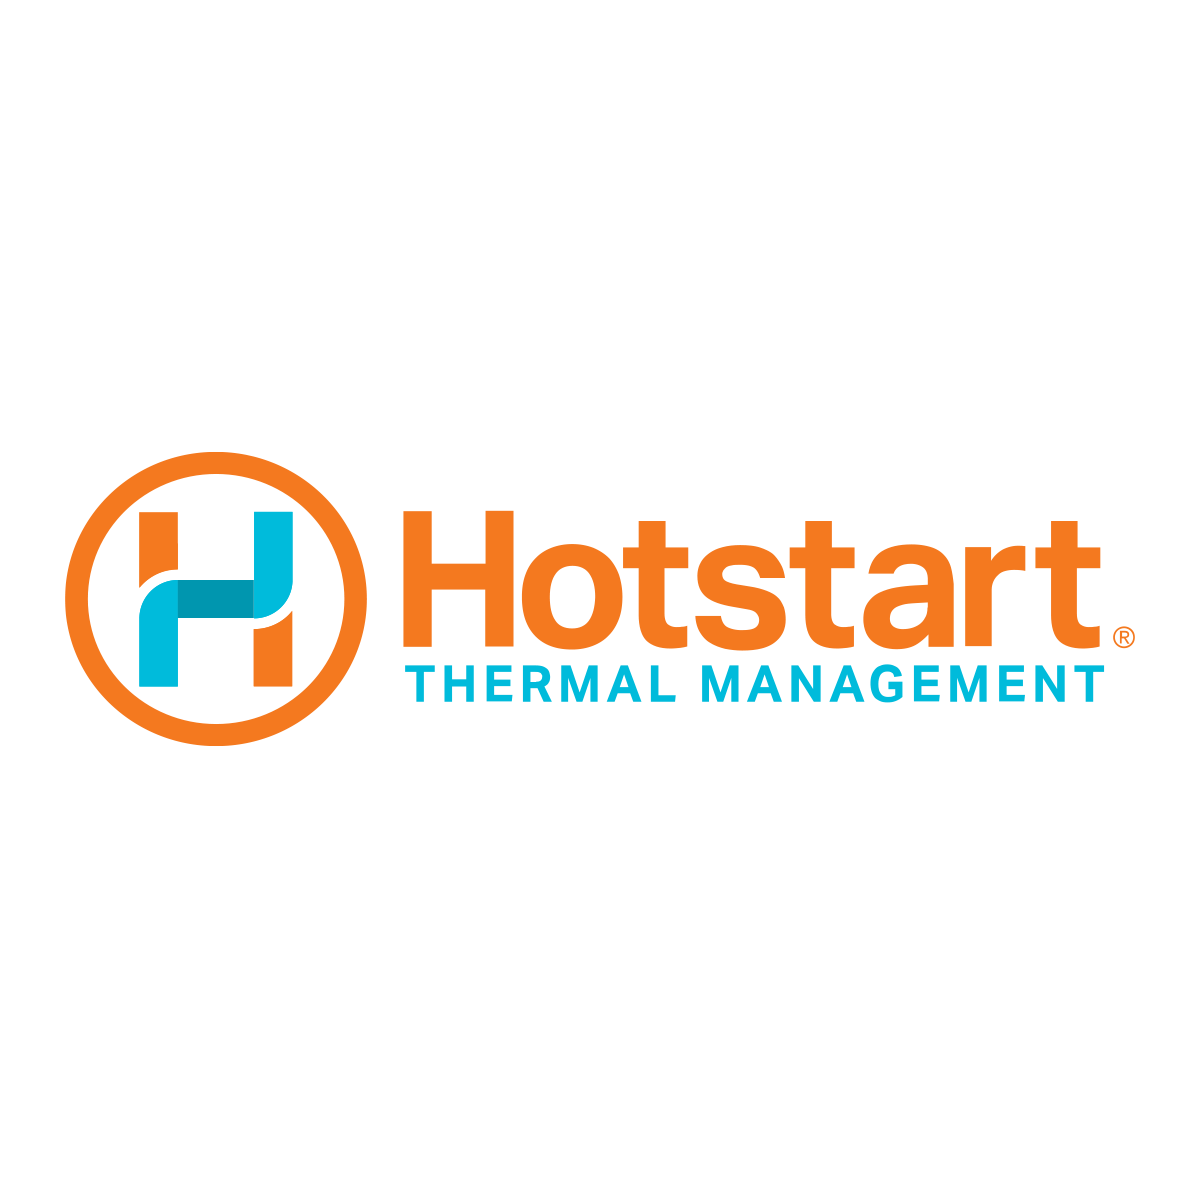 Hotstart Thermal Management > Performance improving heating and